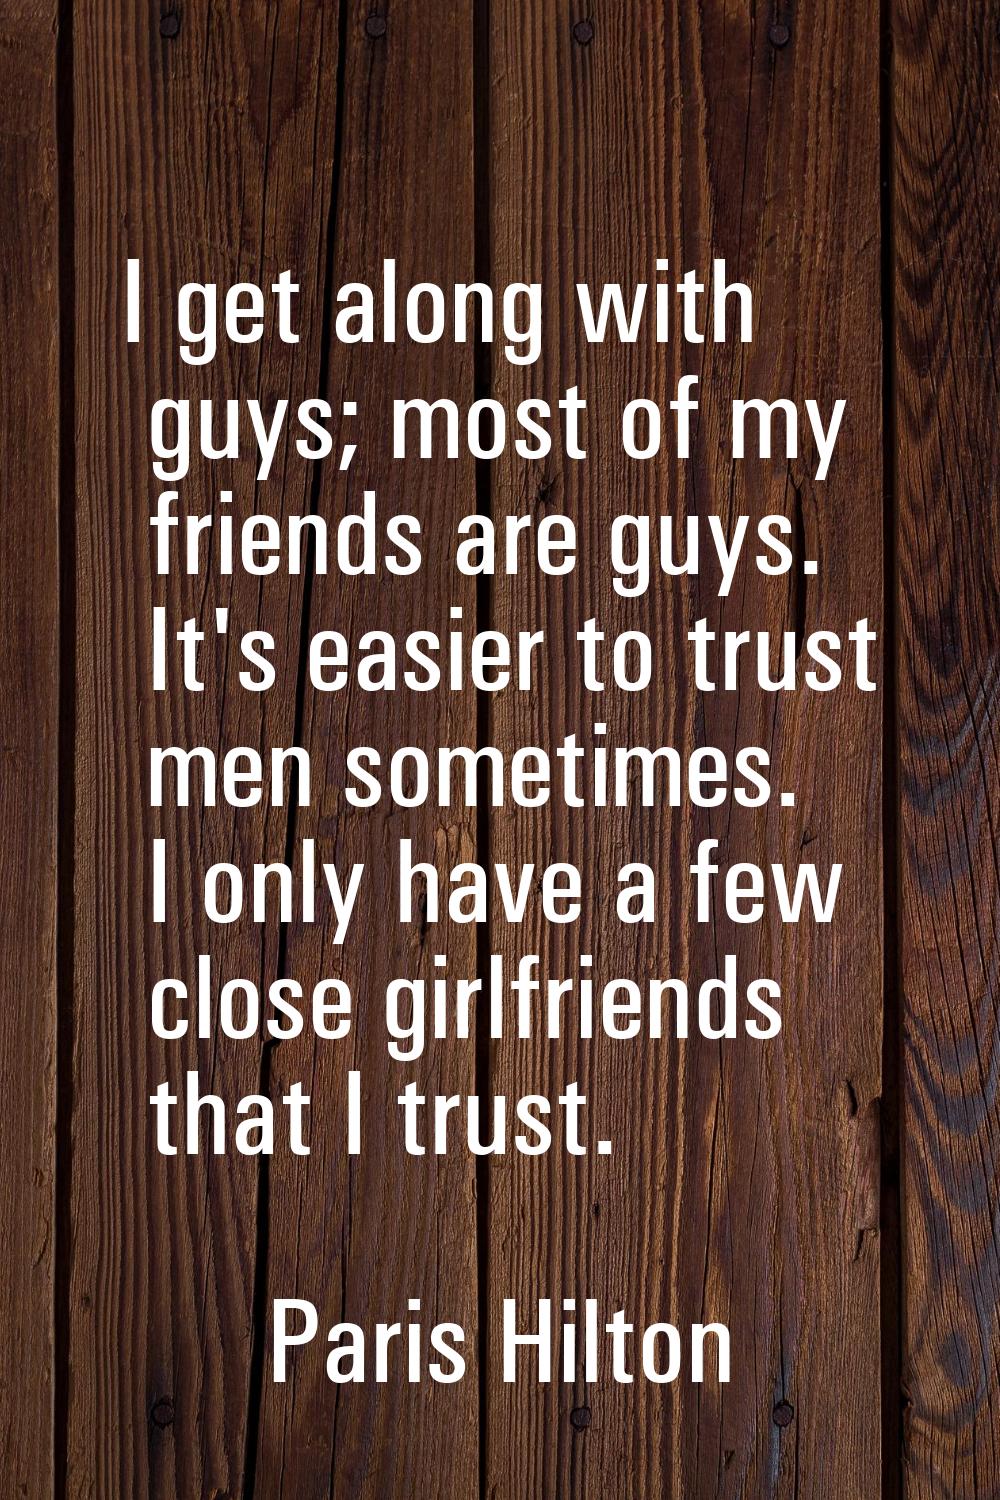 I get along with guys; most of my friends are guys. It's easier to trust men sometimes. I only have